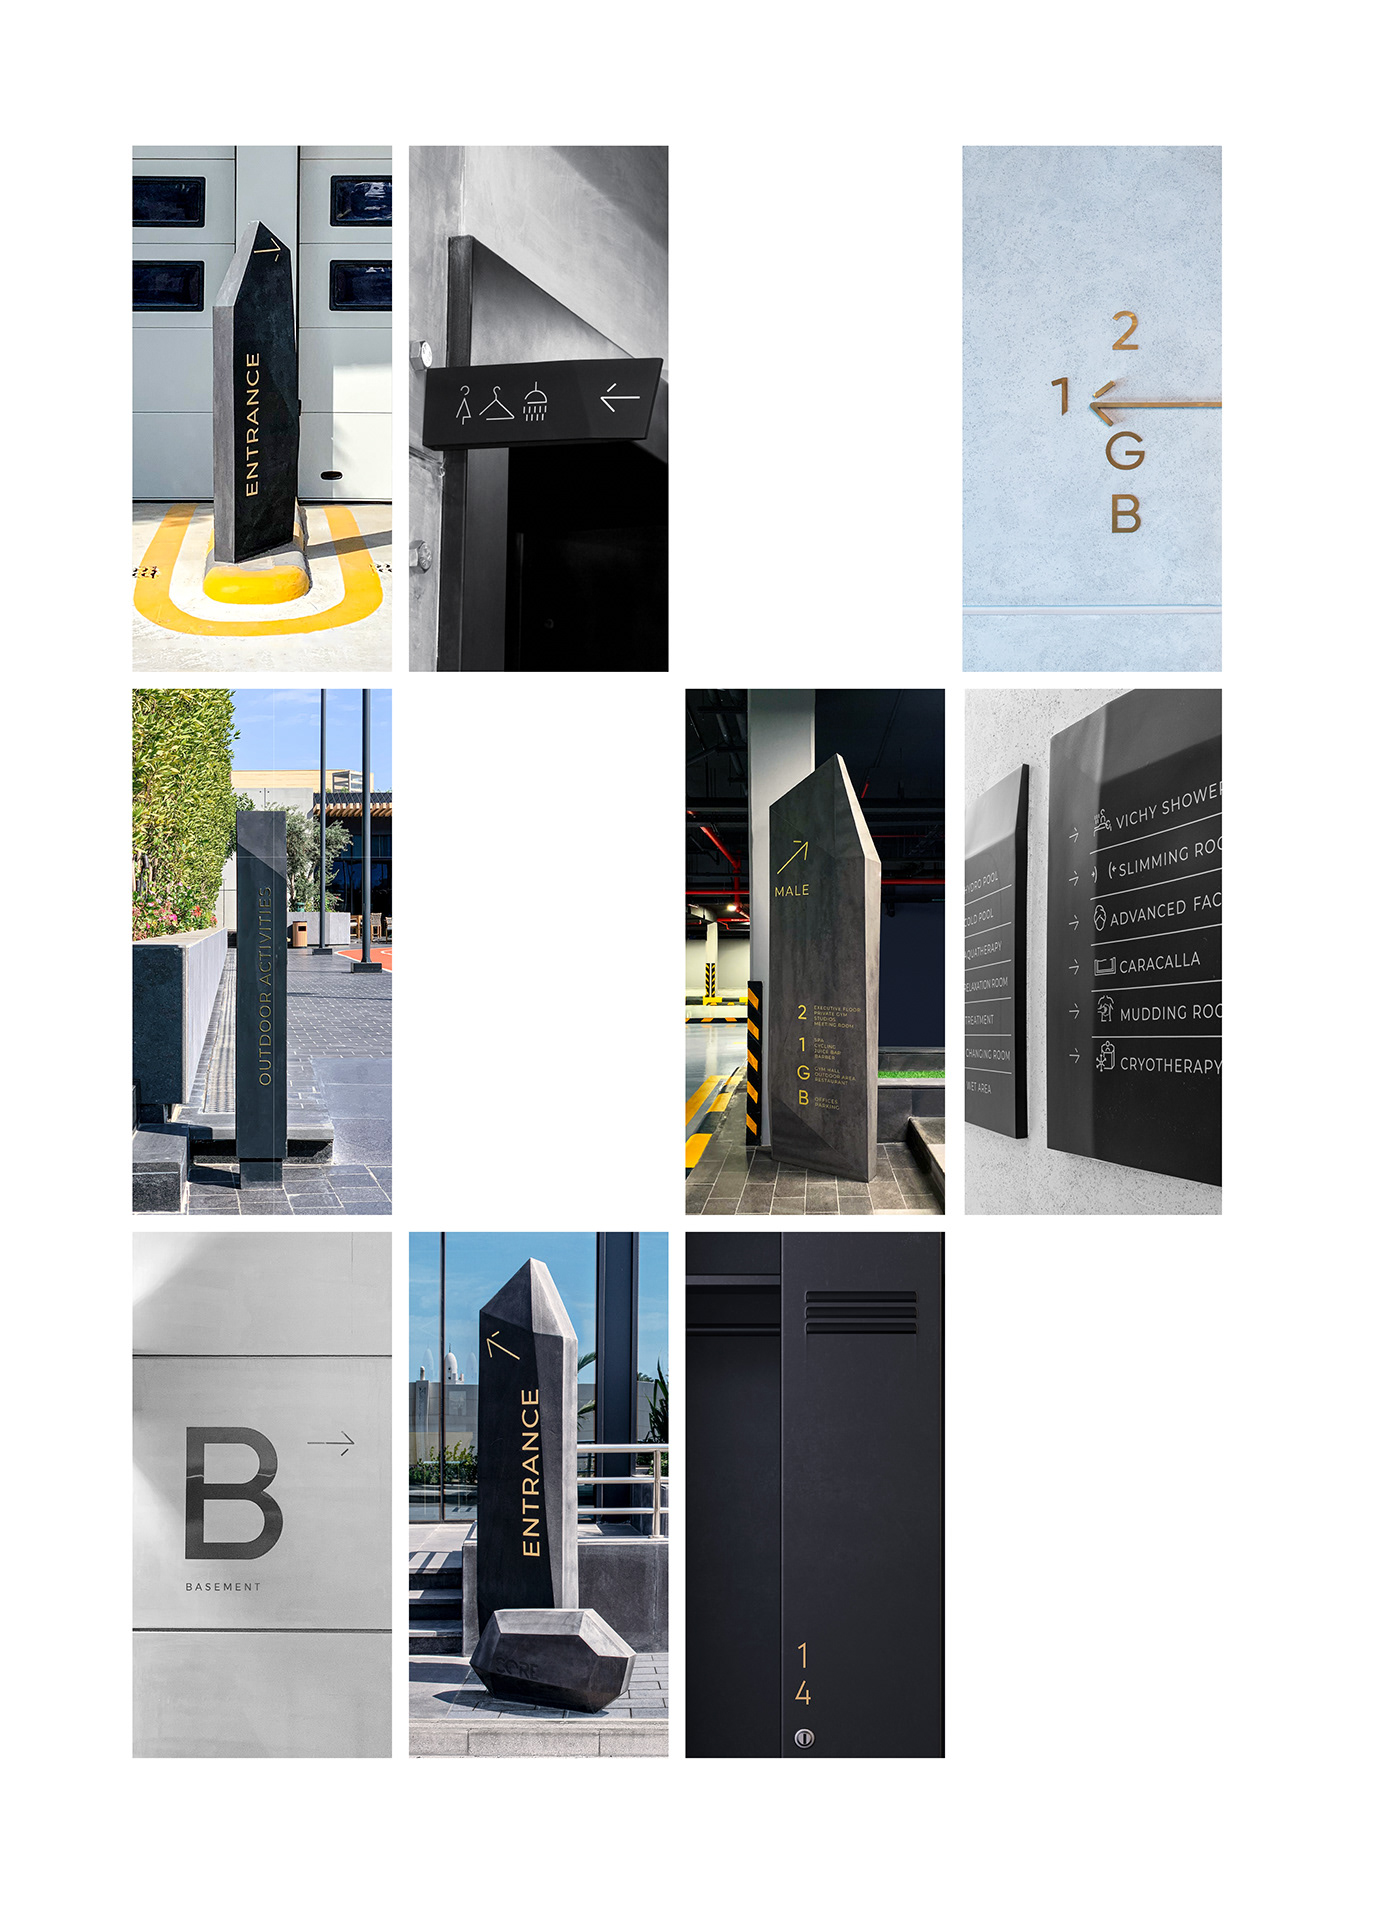 core environmental gridsystem guideline iconography layouting spacedesign system wayfinding